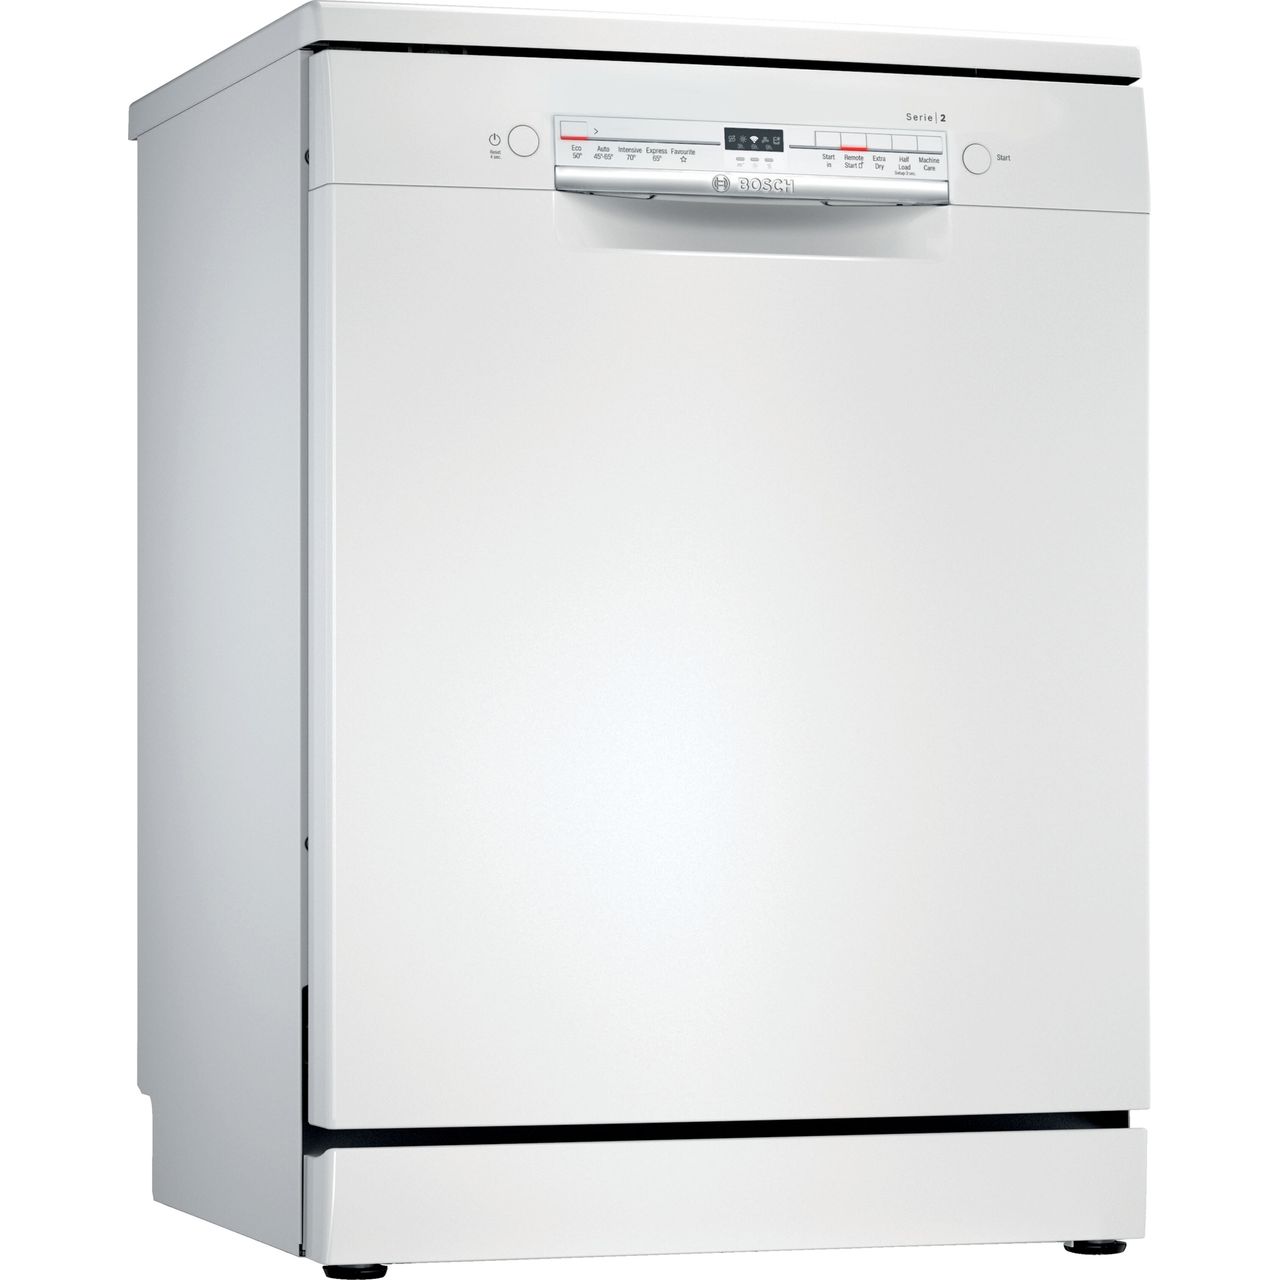 Bosch Serie 2 Sms2itw08g Full Size Dishwasher White 12 Place Settings Euronics Limited Promotional Offer